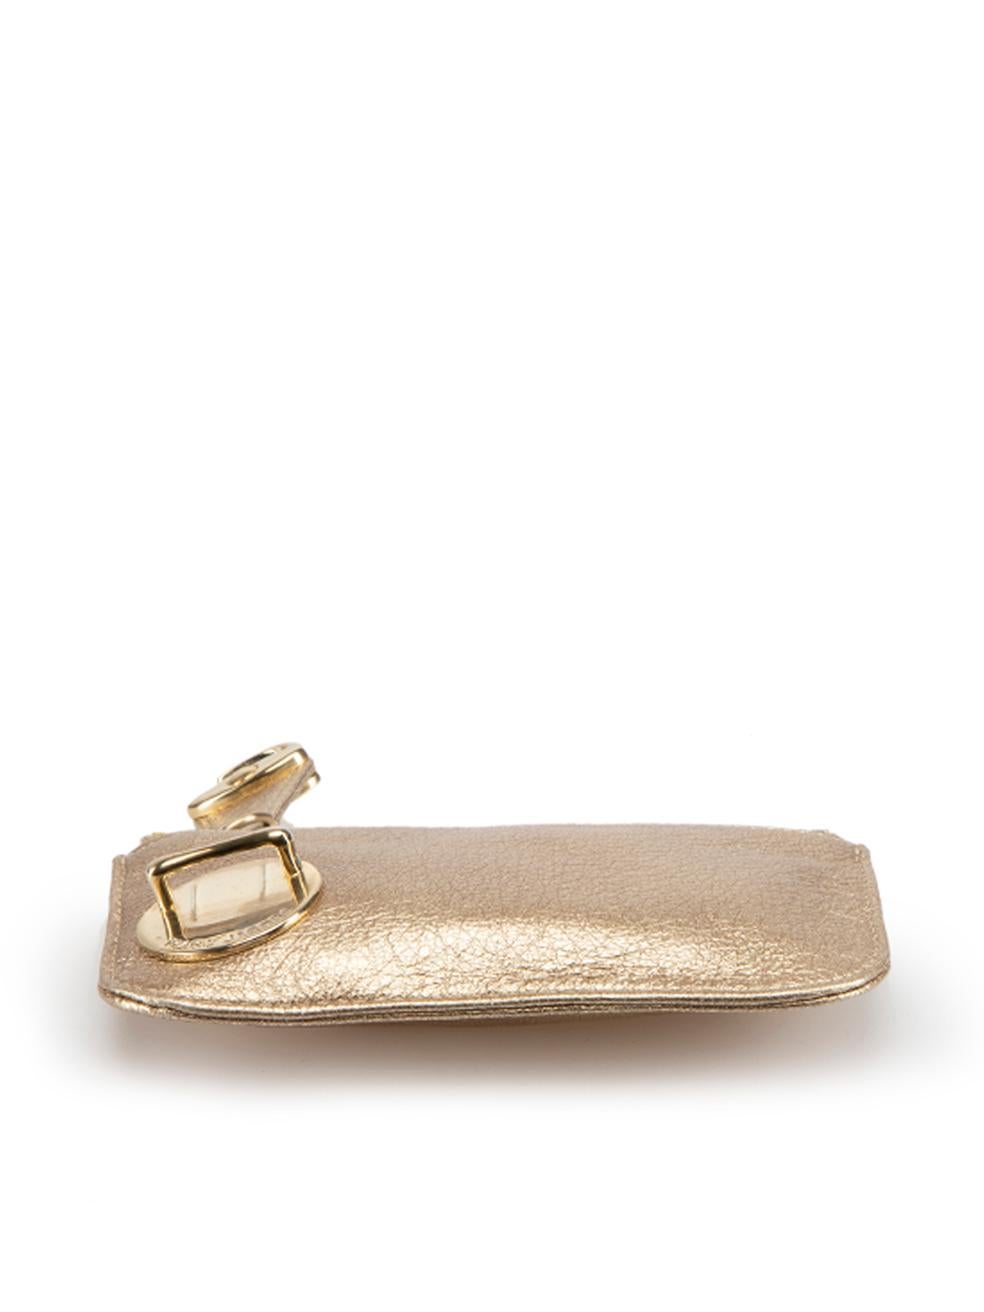 Marc Jacobs Women's Gold Leather Coin Purse 1